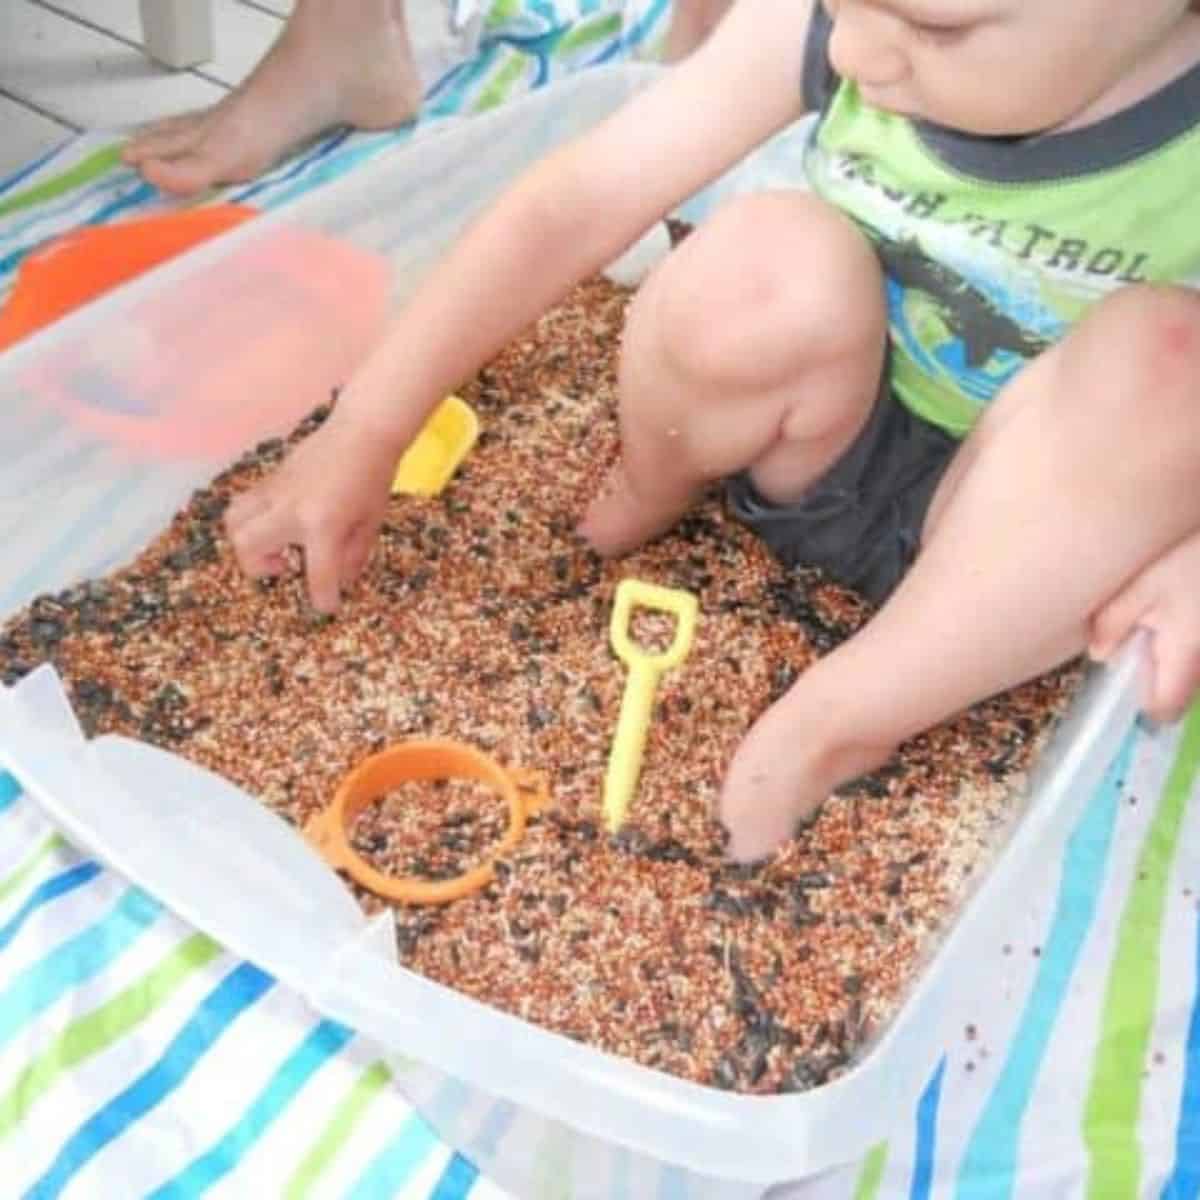 Use sensory seeking activities to calm and organize sensory seeking behaviors in your “wild” child or toddler that seems to never stop moving.